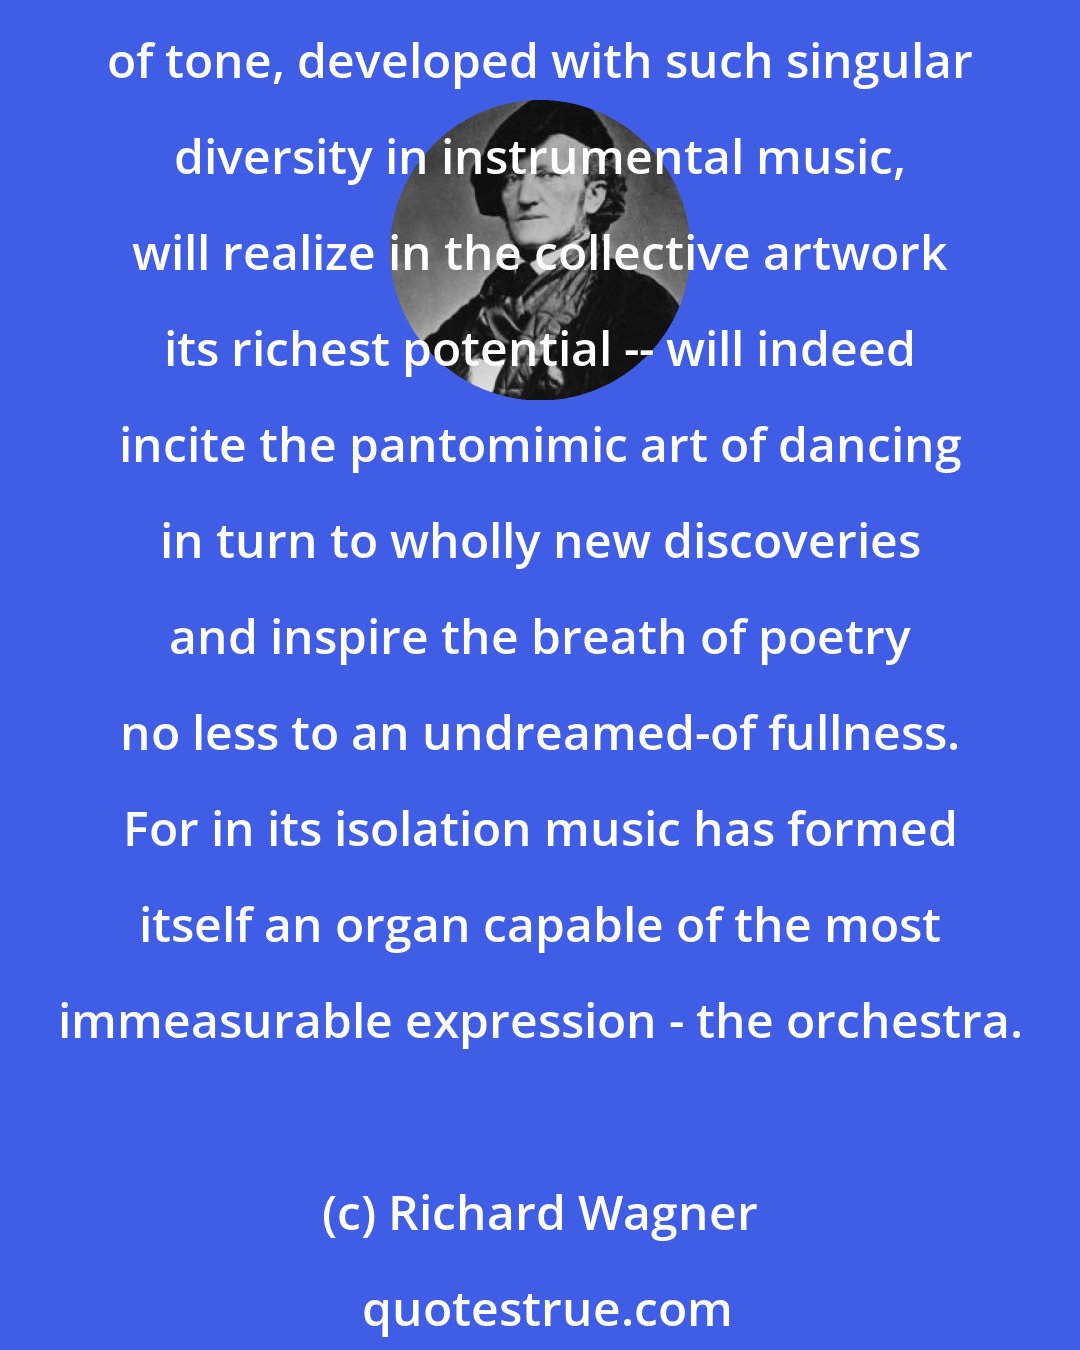 Richard Wagner: True drama can be conceived only as resulting from the collective impulse of all the arts to communicate in the most immediate way with a collective public... Thus especially the art of tone, developed with such singular diversity in instrumental music, will realize in the collective artwork its richest potential -- will indeed incite the pantomimic art of dancing in turn to wholly new discoveries and inspire the breath of poetry no less to an undreamed-of fullness. For in its isolation music has formed itself an organ capable of the most immeasurable expression - the orchestra.